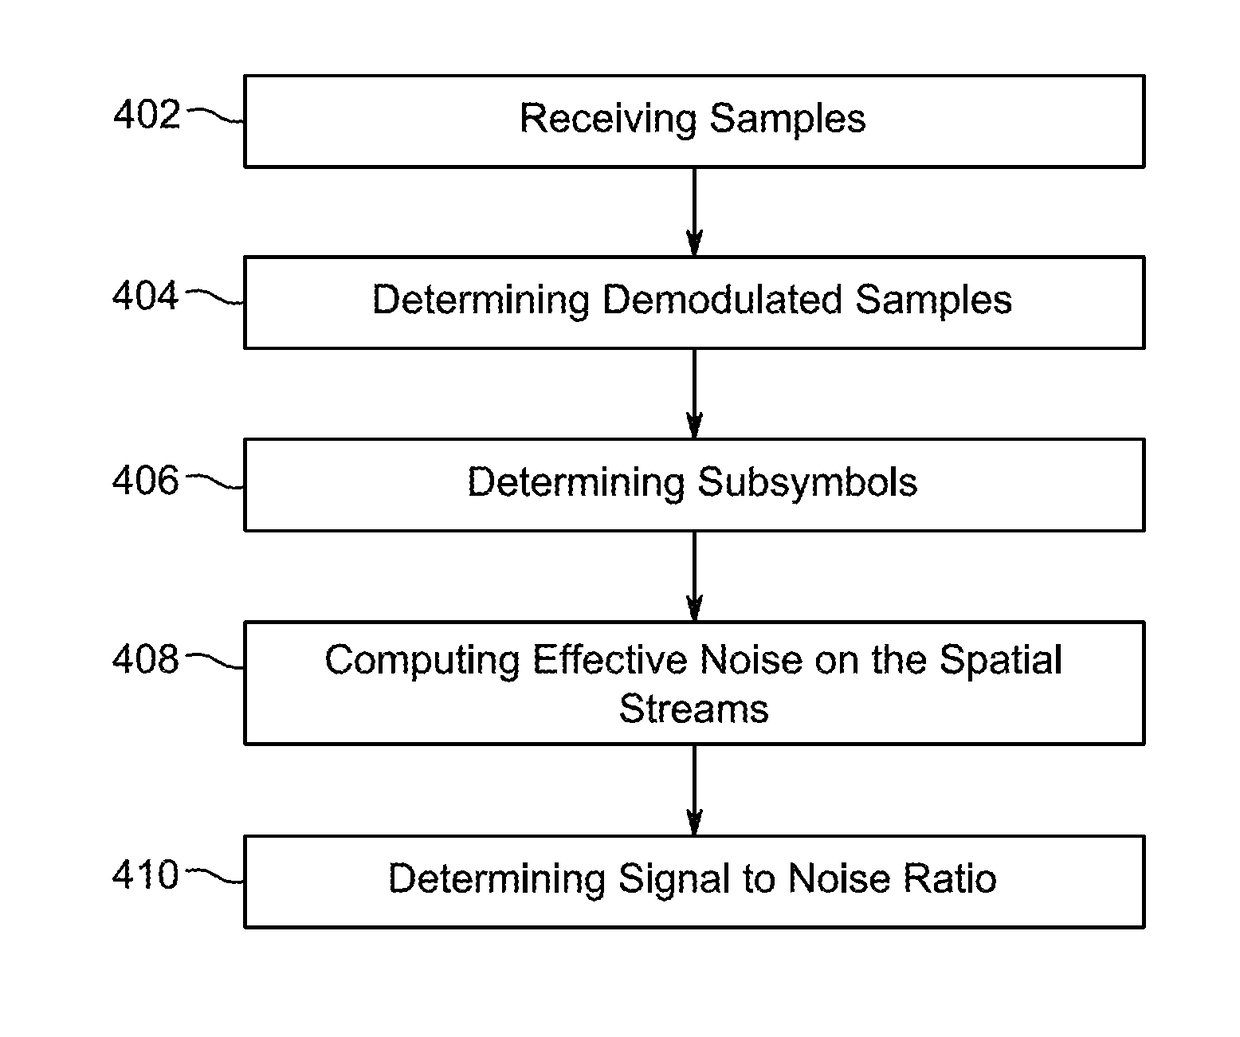 Systems and methods for calculating log-likelihood ratios in a MIMO detector